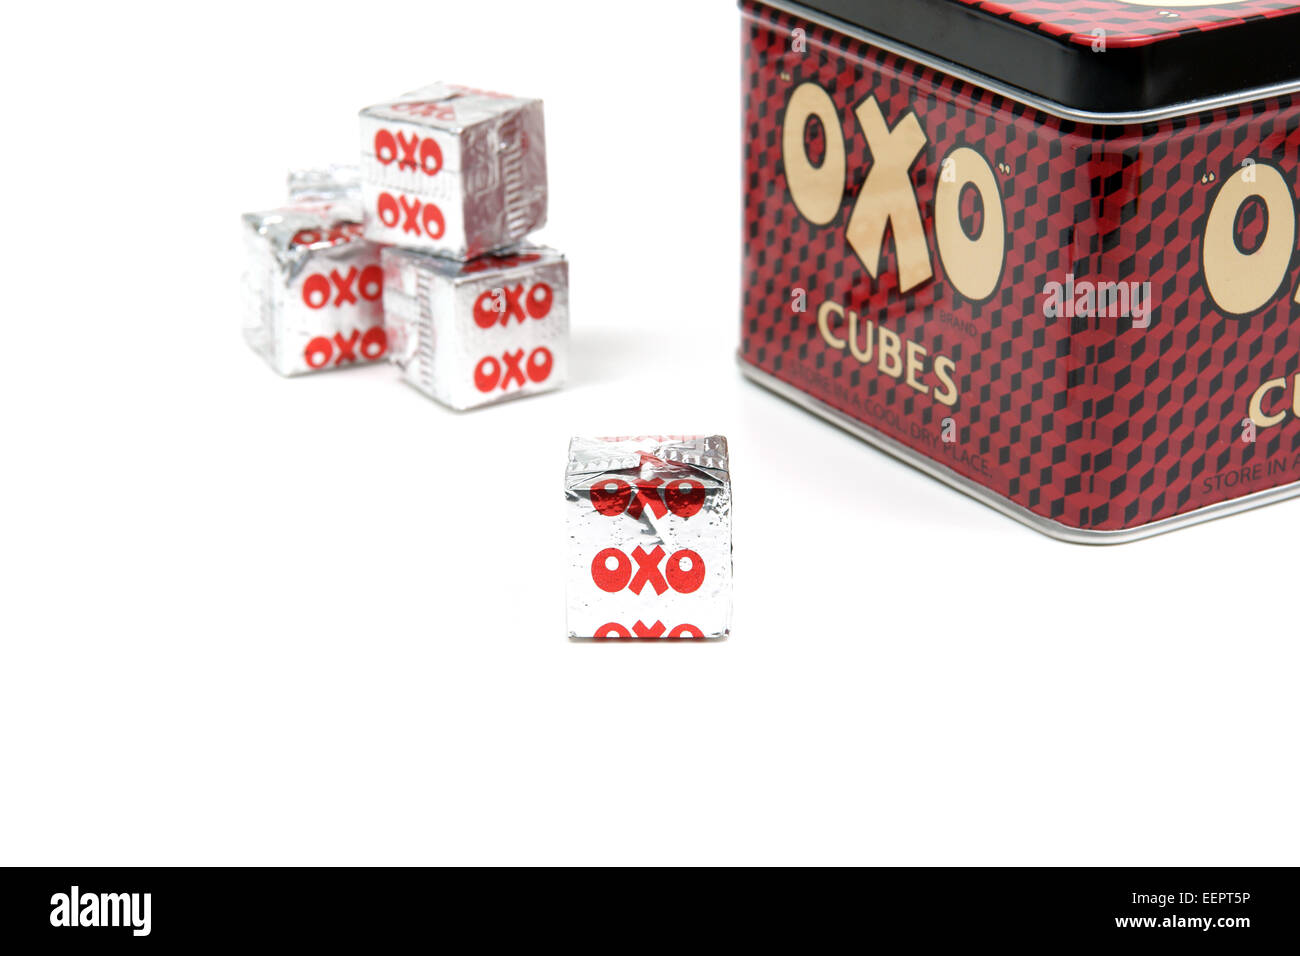 OXO stock cubes in their distinctive silver foil wrapper first manufactured in 1910. Oxo is owned by Premier Foods in the UK Stock Photo